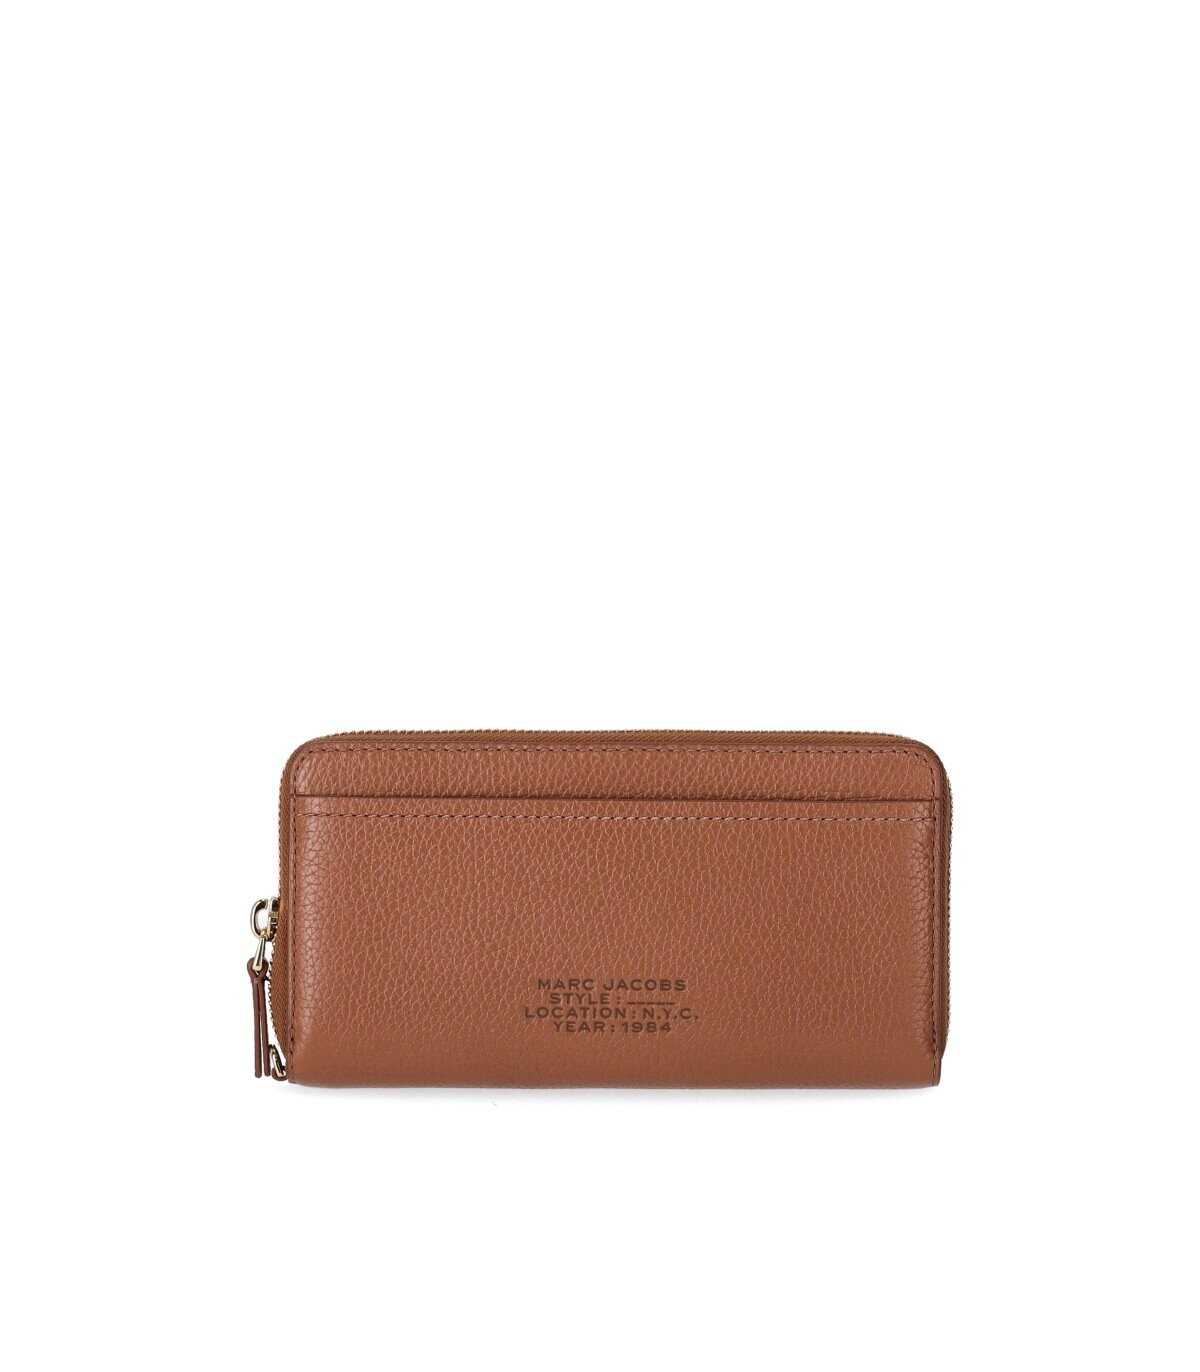 Marc Jacobs MARC JACOBS THE LEATHER CONTINENTAL ARGAN OIL WALLET Leather